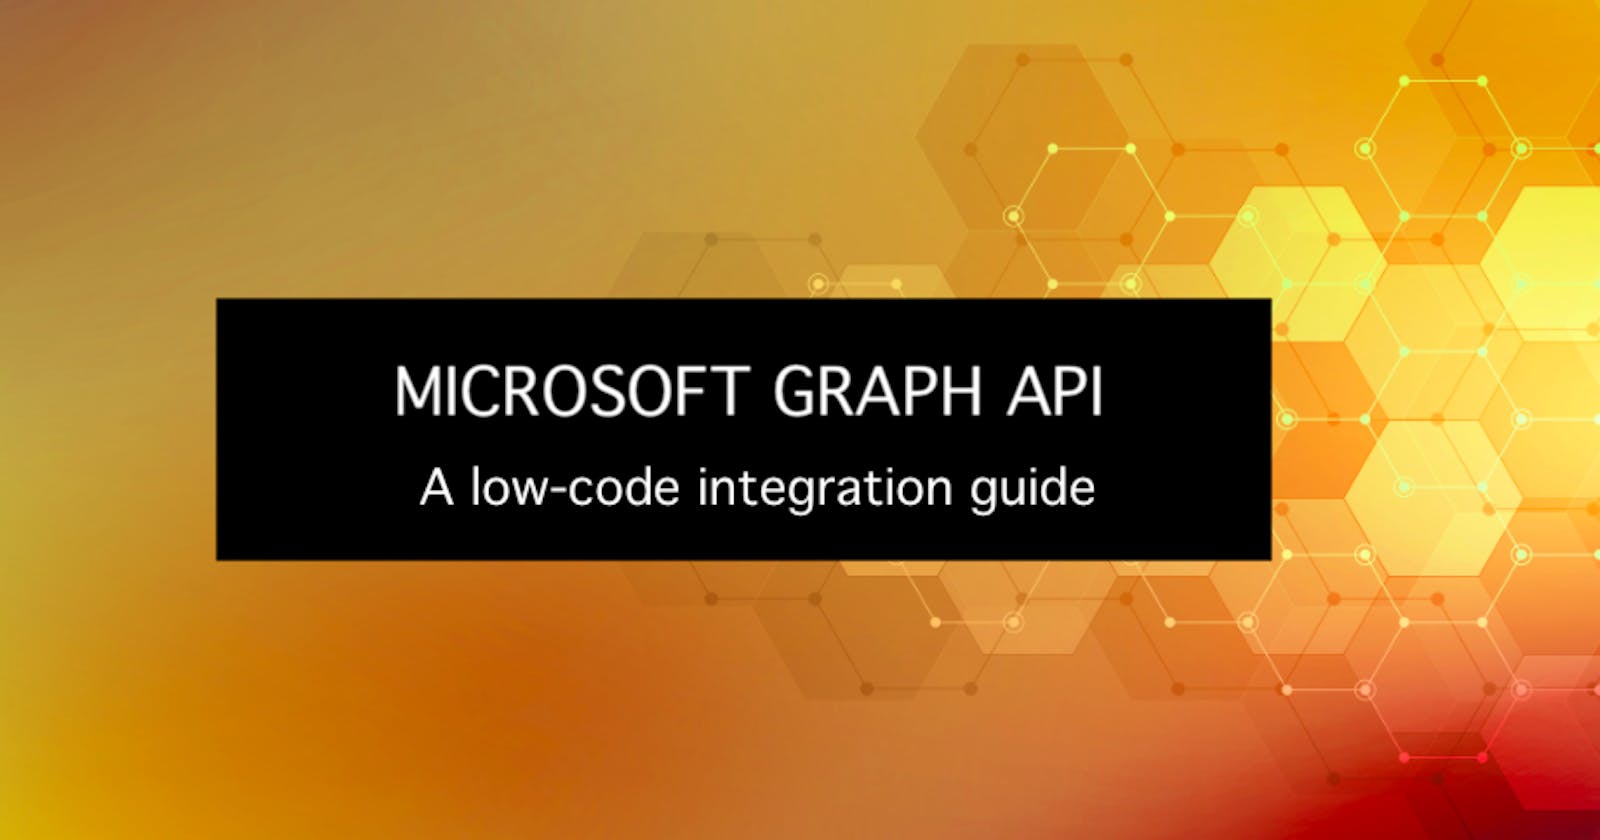 [Guide] The Simplest Way to Integrate with the Microsoft Graph API